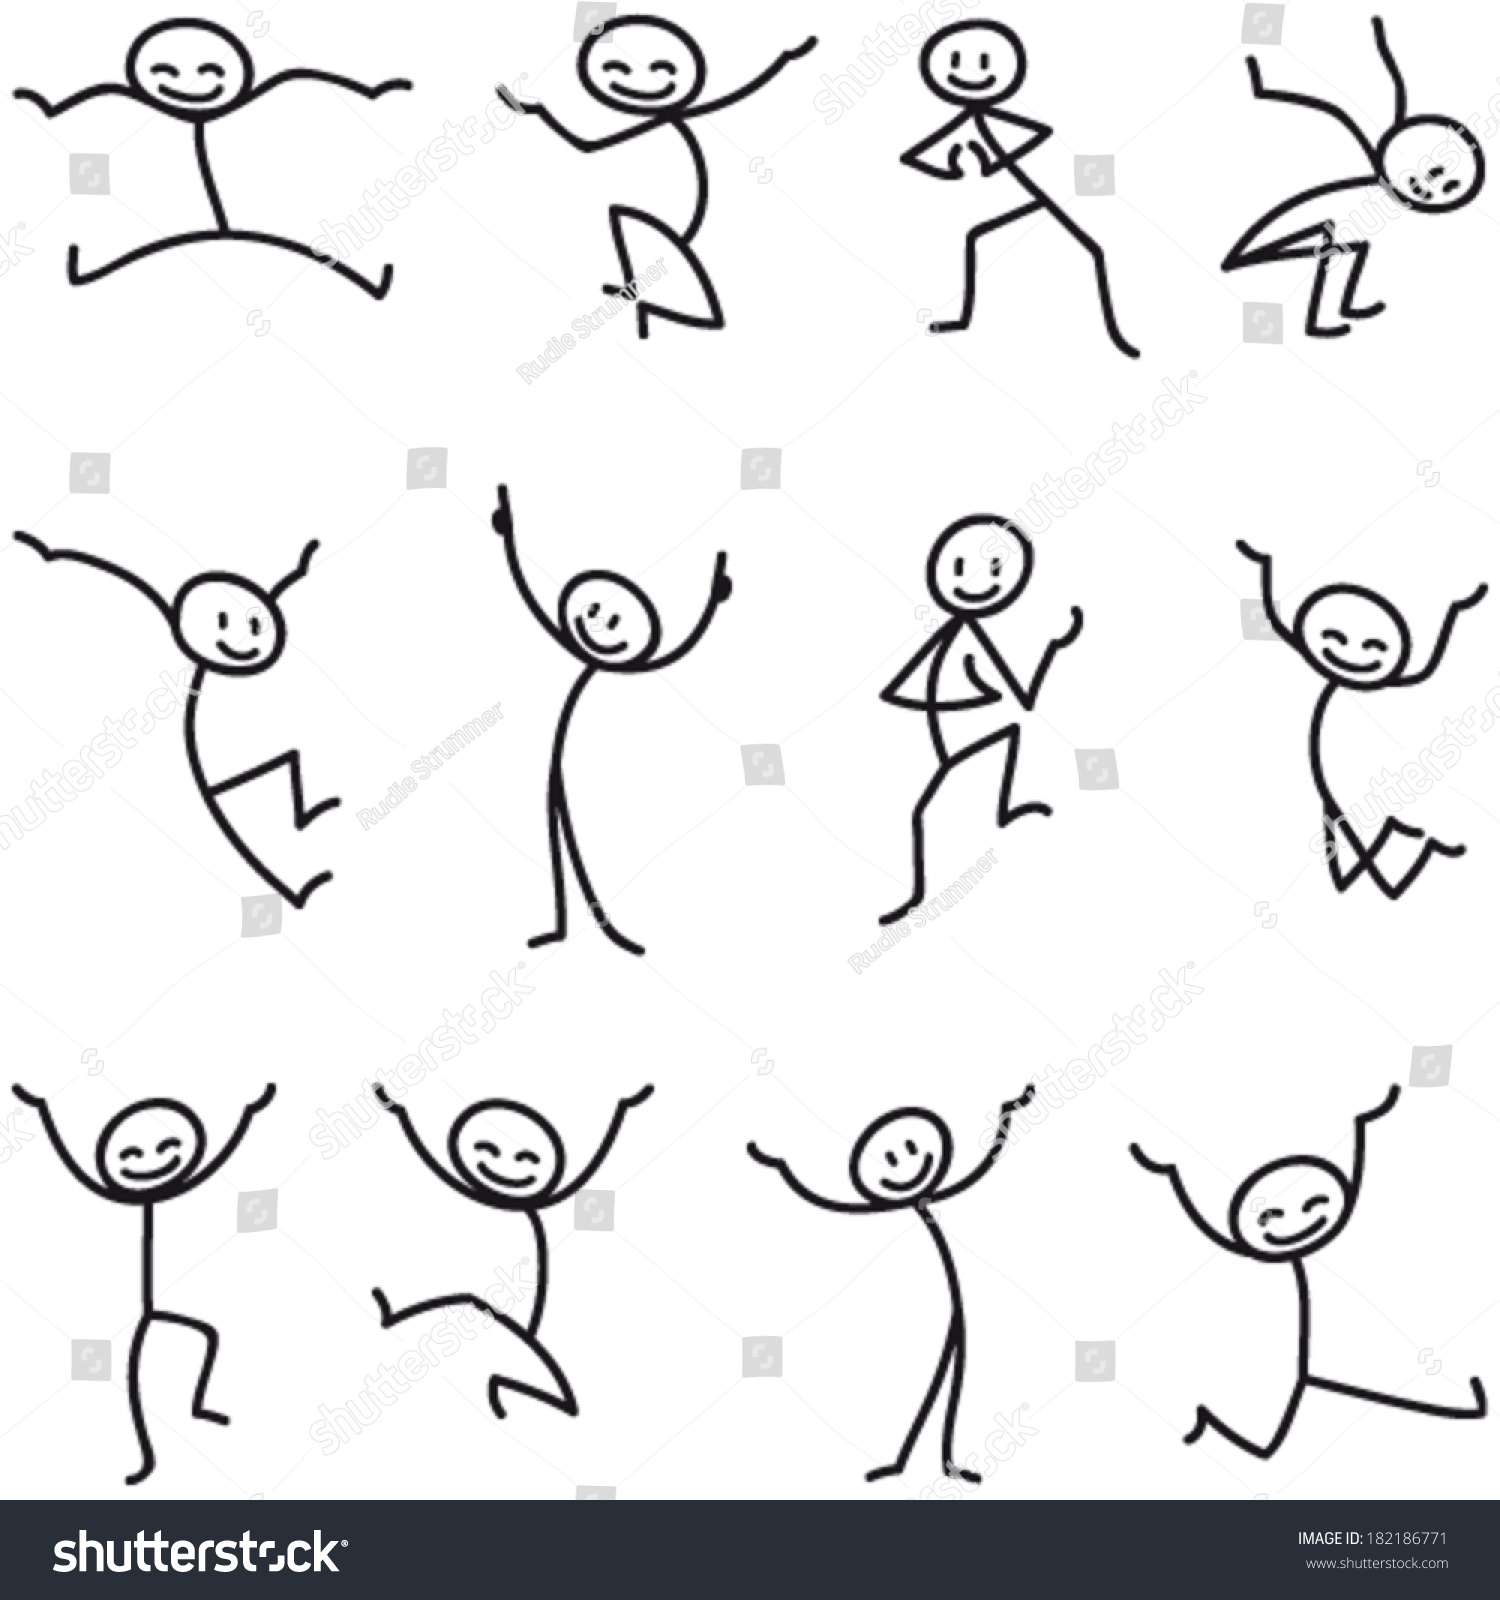 stock-vector-set-of-vector-stick-figures-happy-stick-man-jumping-and-celebrating-182186771.jpg